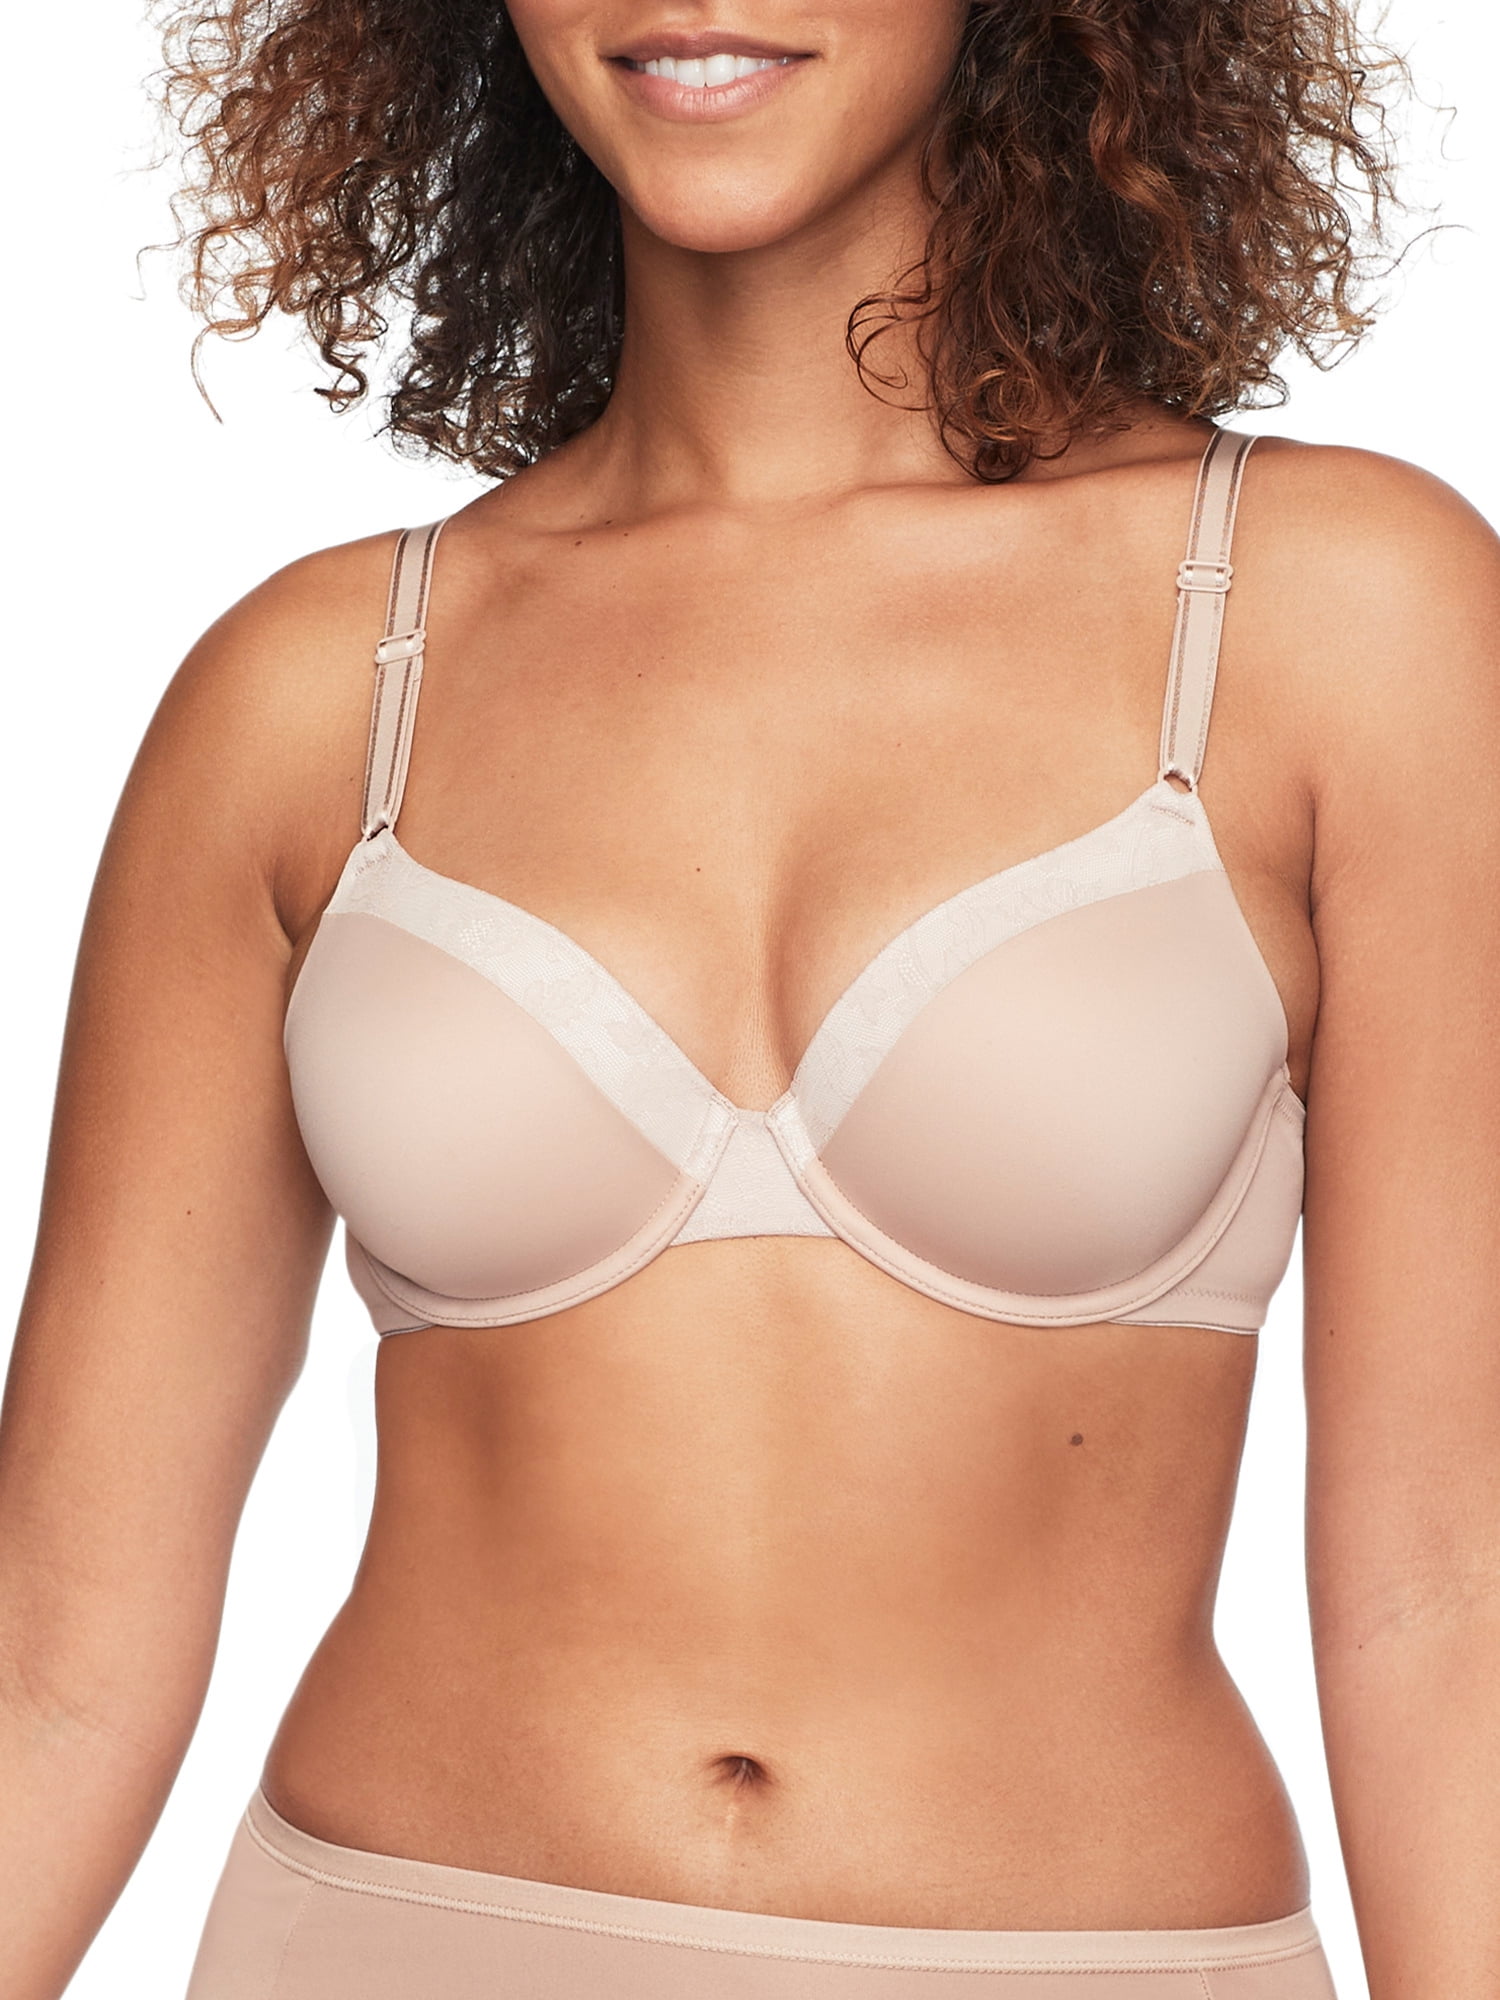 Blissful Benefits by Warner's Women's Smooth Look Underwire